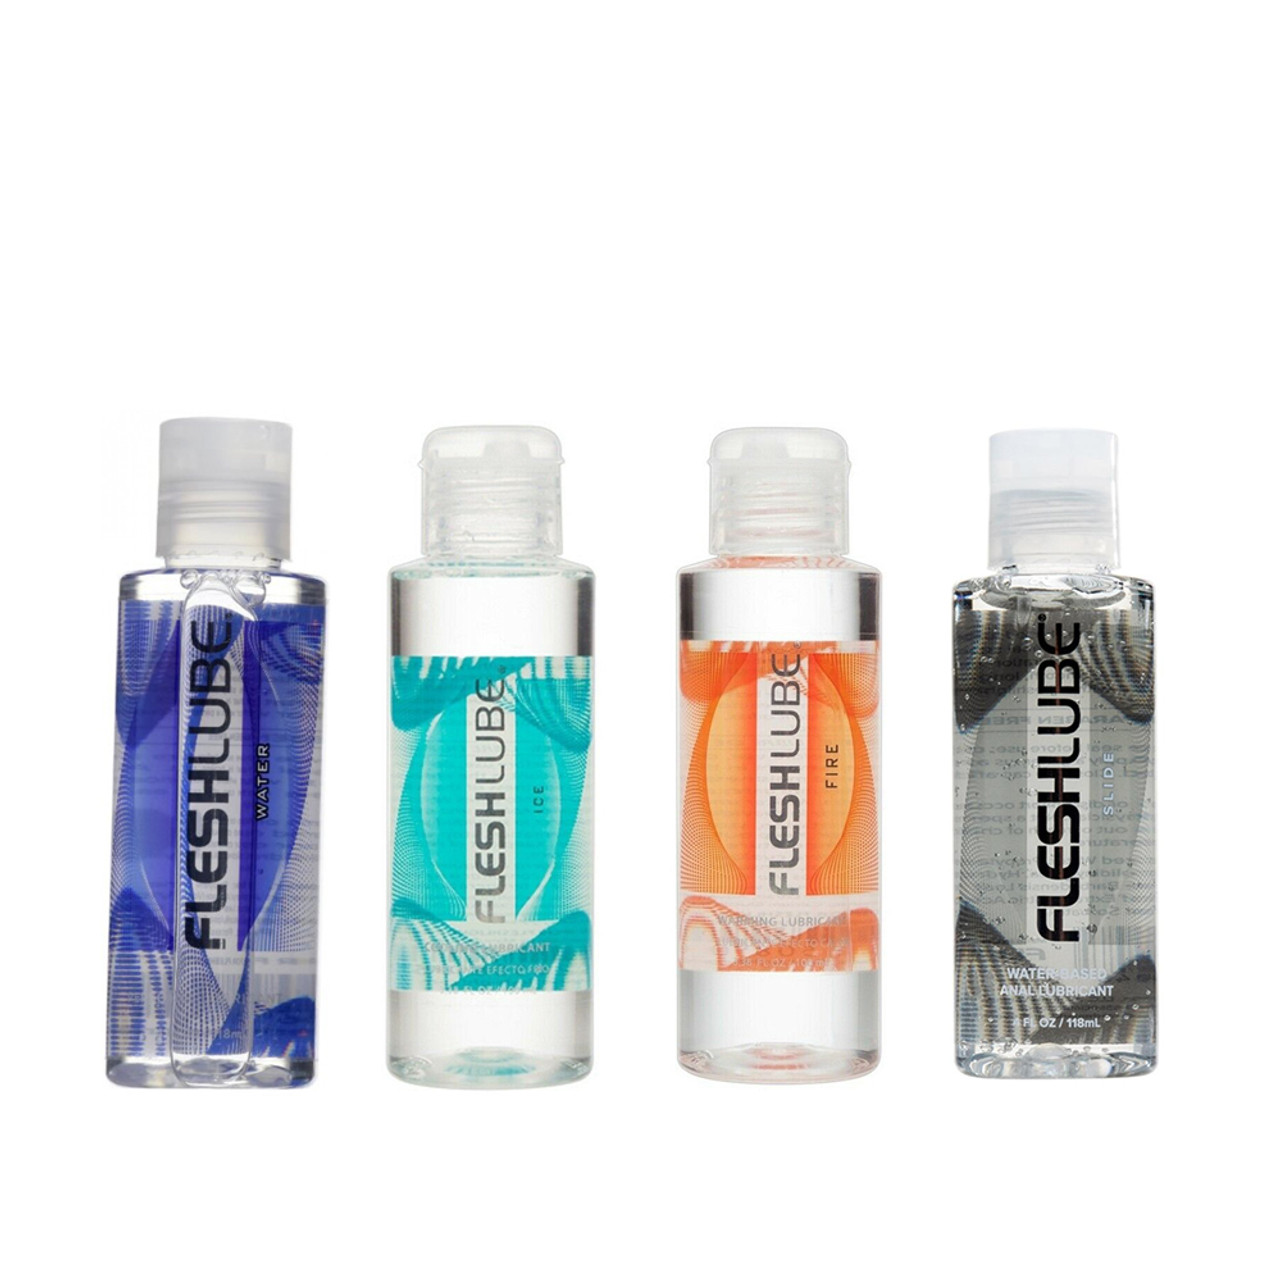 Buy The Fleshlube Ice Water Based Cooling Lubricant Paraben Free Usa Made In 4 Oz Or 100 Ml